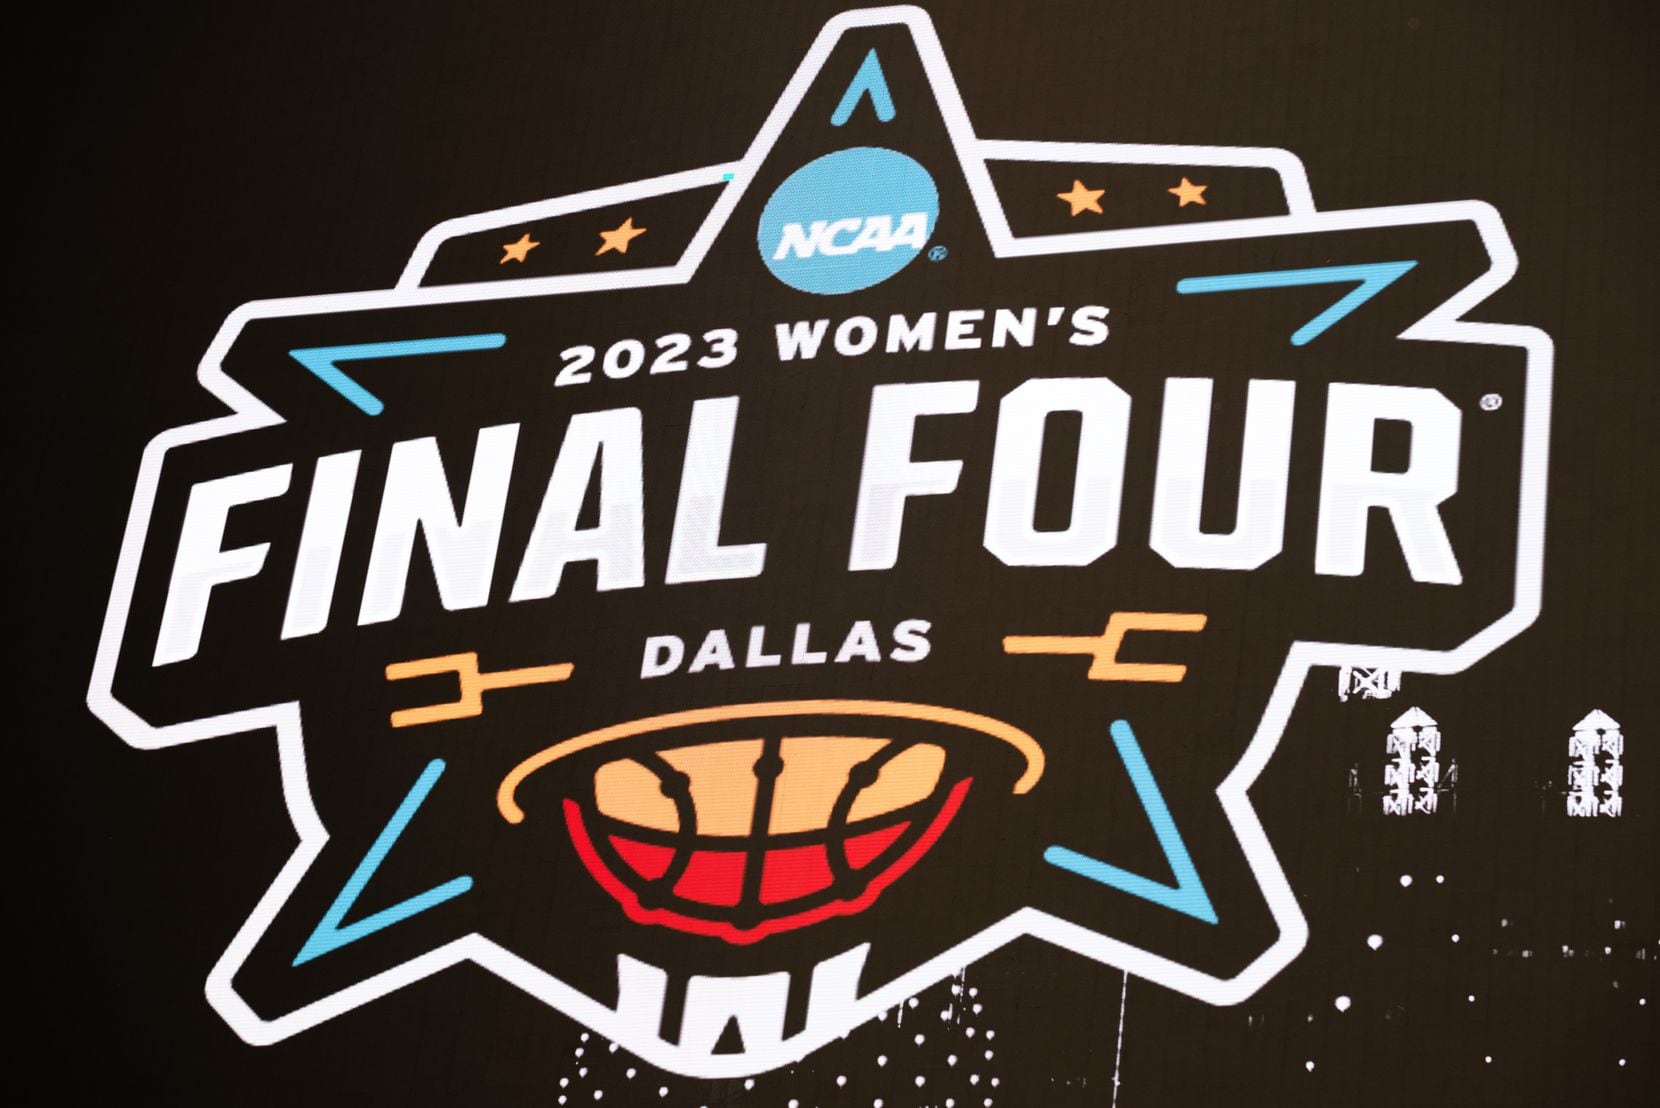 Photos: There it is! The NCAA reveals the logo for the 2023 women's Final Four in Dallas